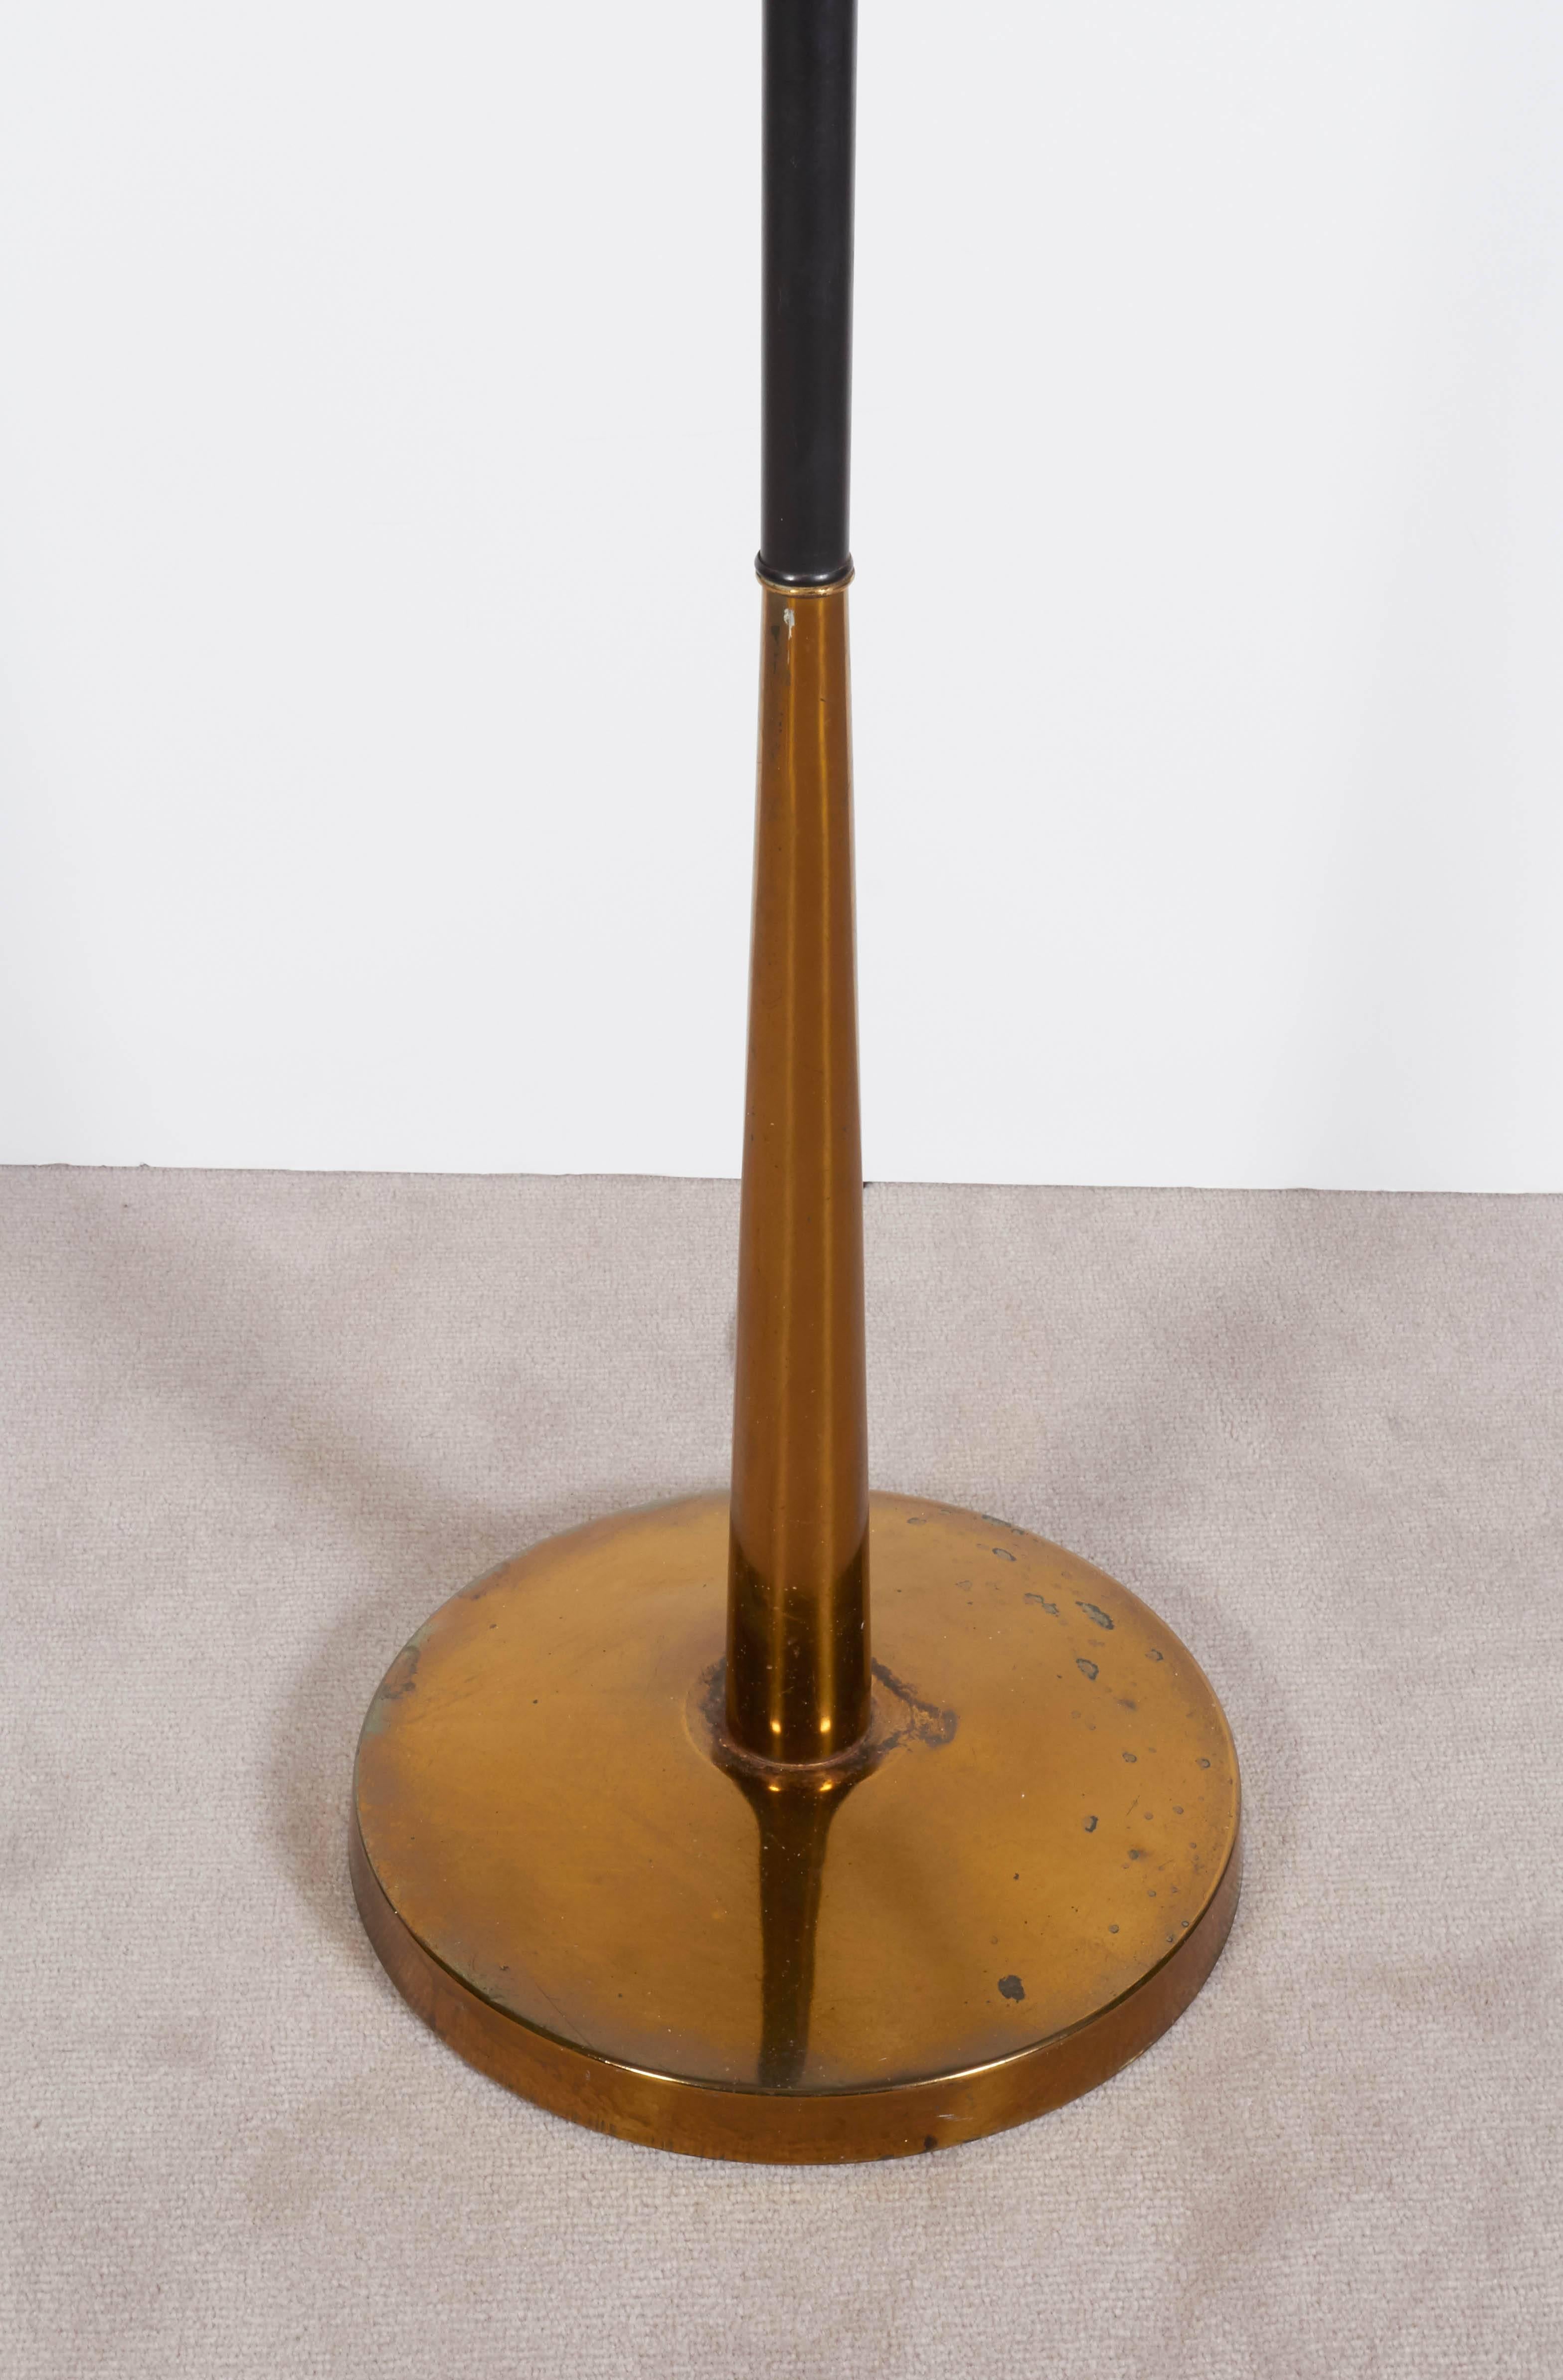 A Mid-Century era brass floor lamp, with tapered stem and accented with matte black enamel; includes milk glass diffuser shade. Very good vintage condition, with presence of age appropriate wear and patina to finish.

11082